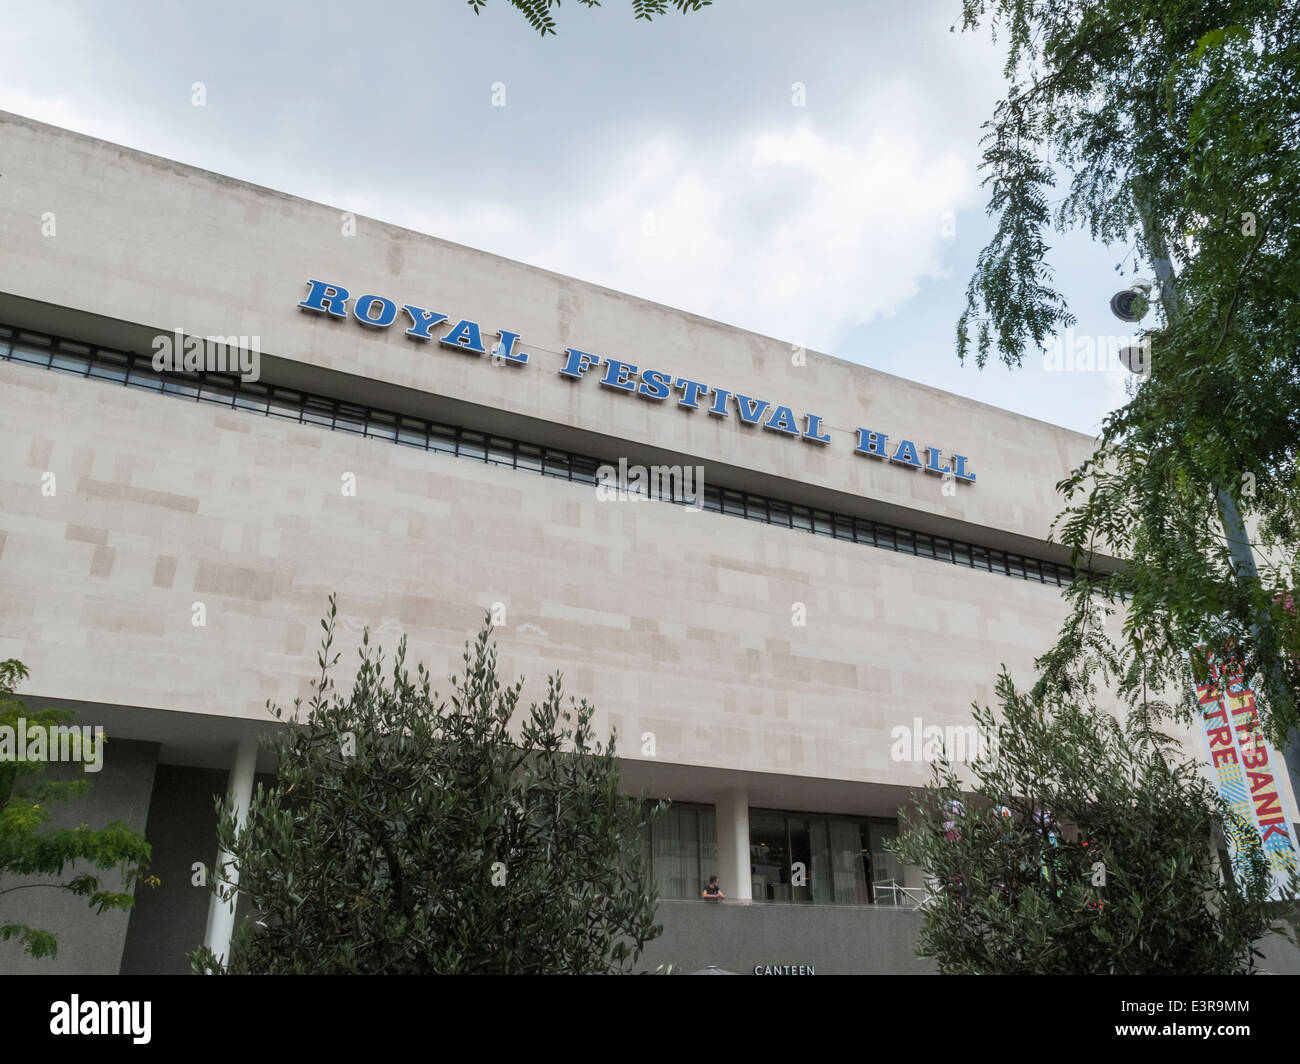 royal-festival-hall-name-logo-high-on-the-exterior-of-the-building-E3R9MM.jpg